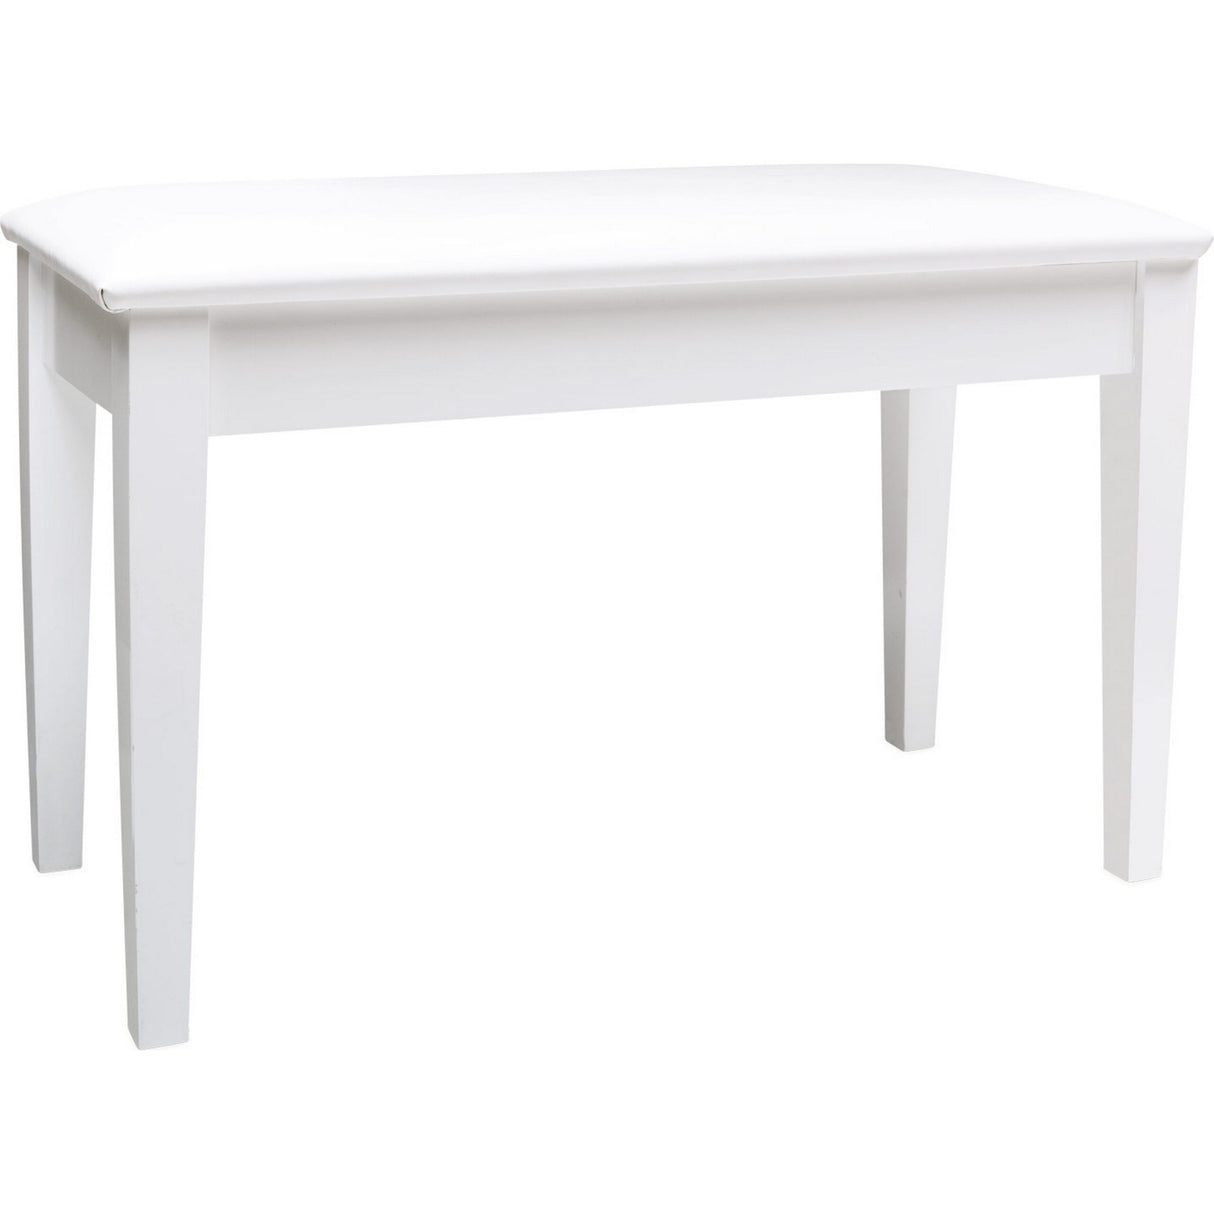 Roland PB-500PWD Duet-Sized Piano Bench, Polished White